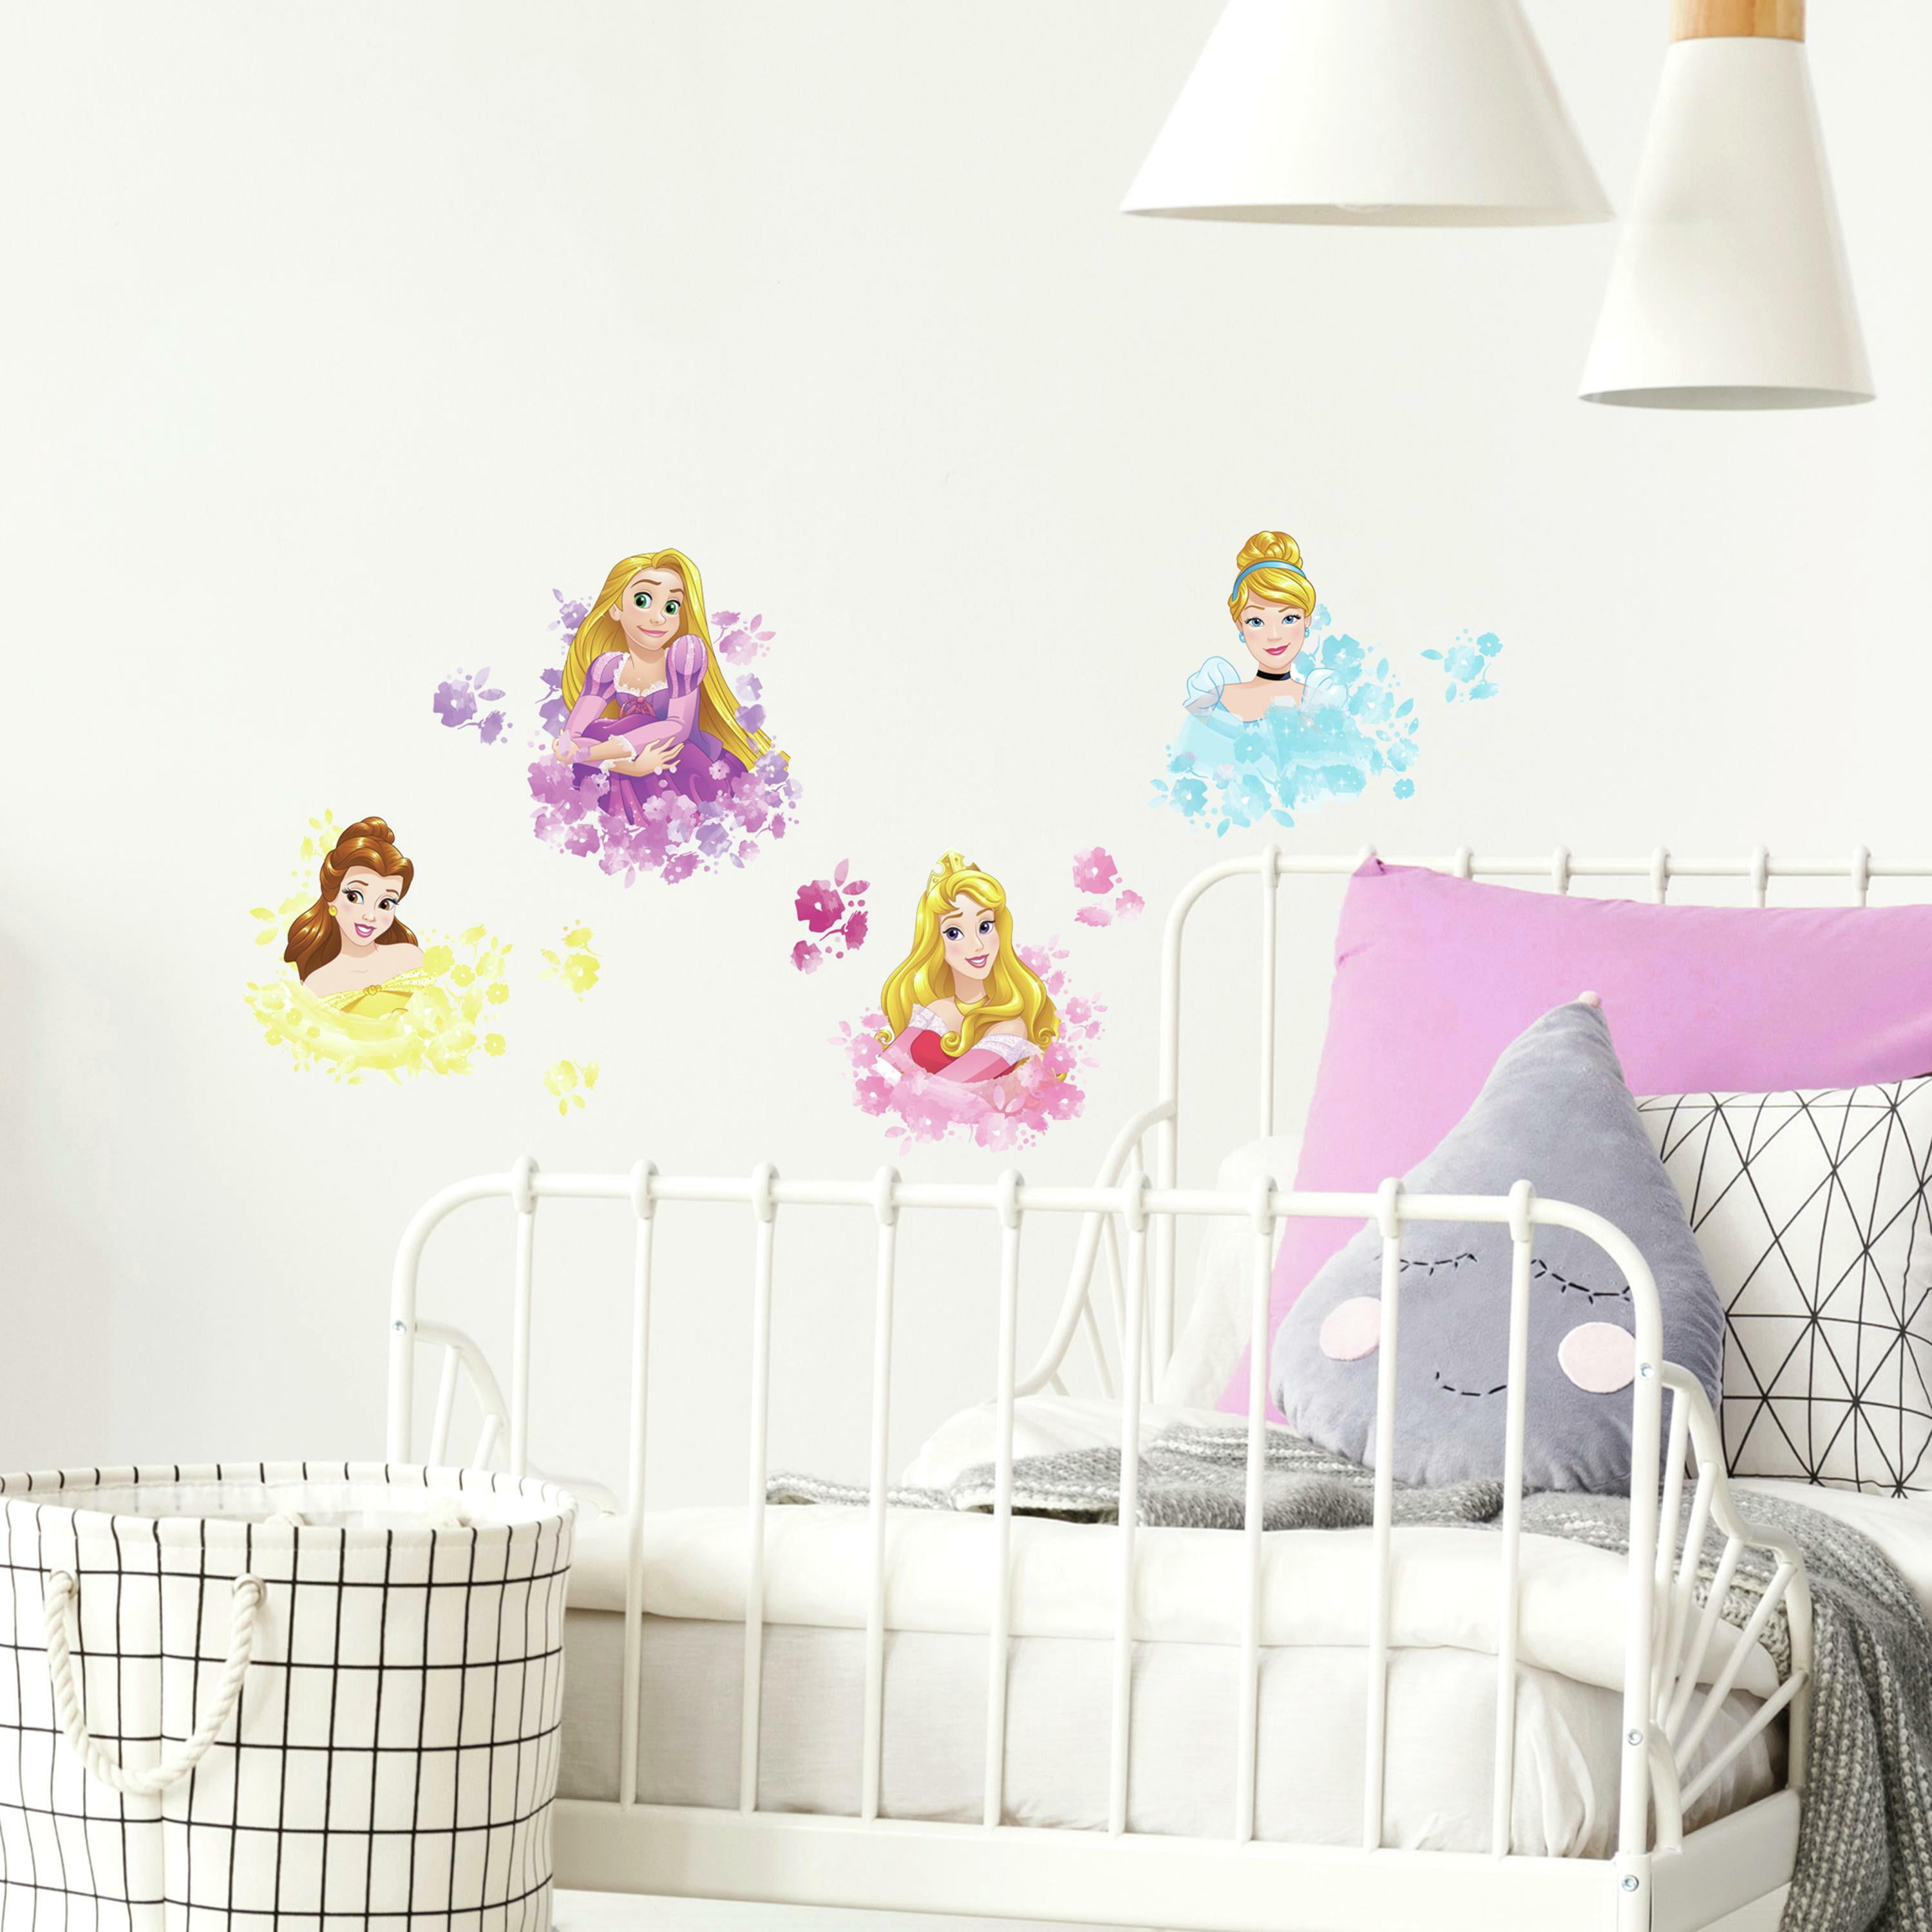 Girly bedroom decor photo wallpaper feature wall Disney PrincessWithout glue